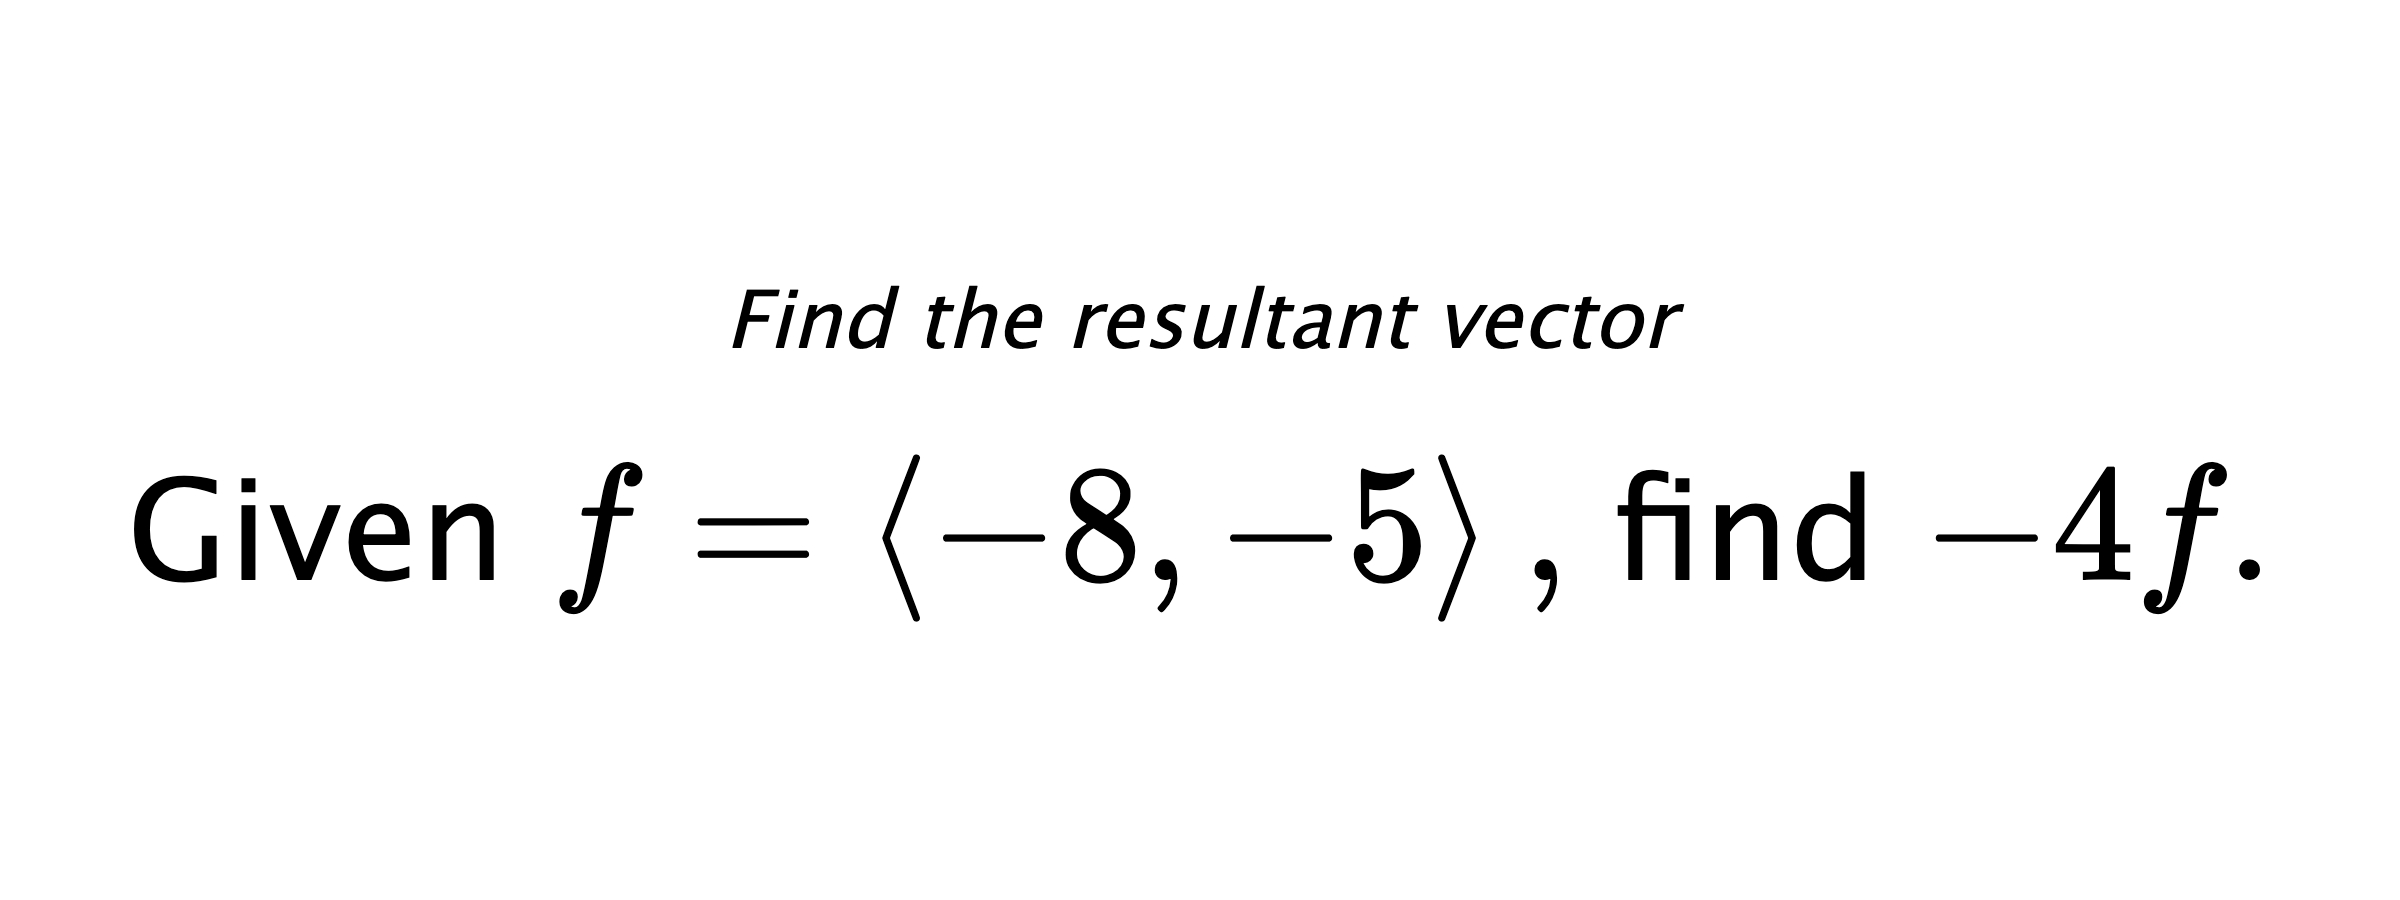 Find the resultant vector Given $ f = \left< -8,-5 \right> ,$ find $ -4f .$